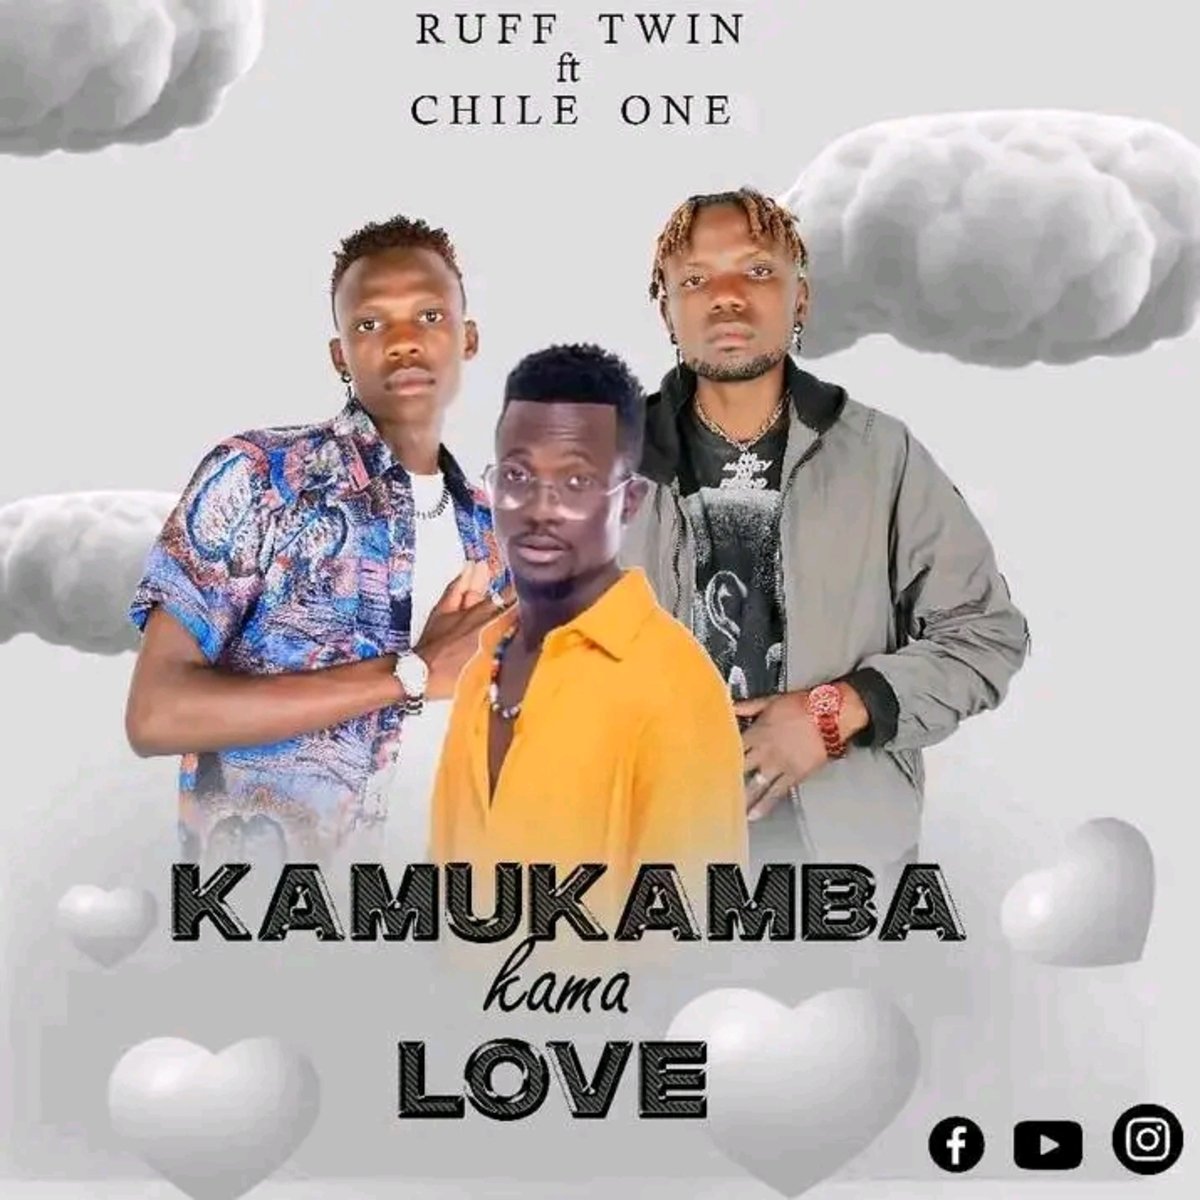 Ruff Twin Ft Chile One Mp3 Download Audio